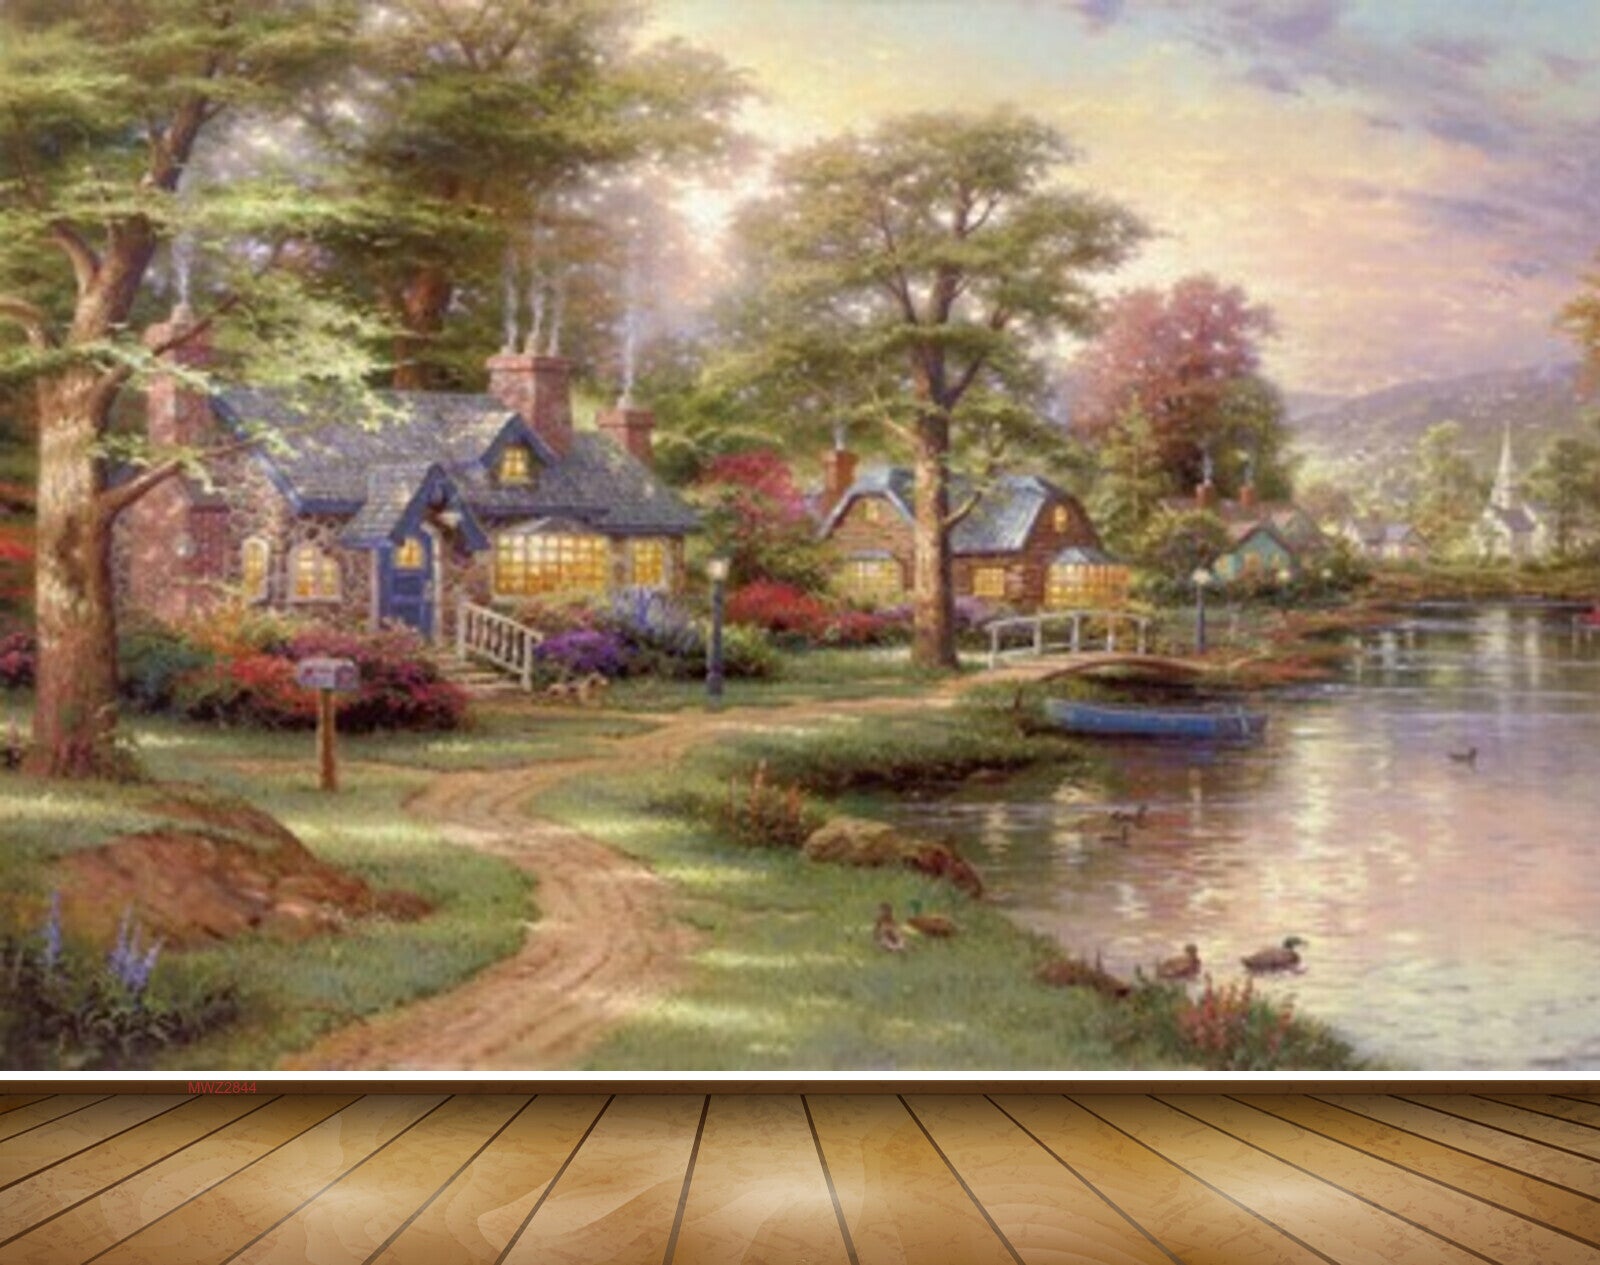 Avikalp MWZ2844 Clouds Trees Mountains Houses Lake River Water Boats Grass Off Road Swans Ducks Painting HD Wallpaper